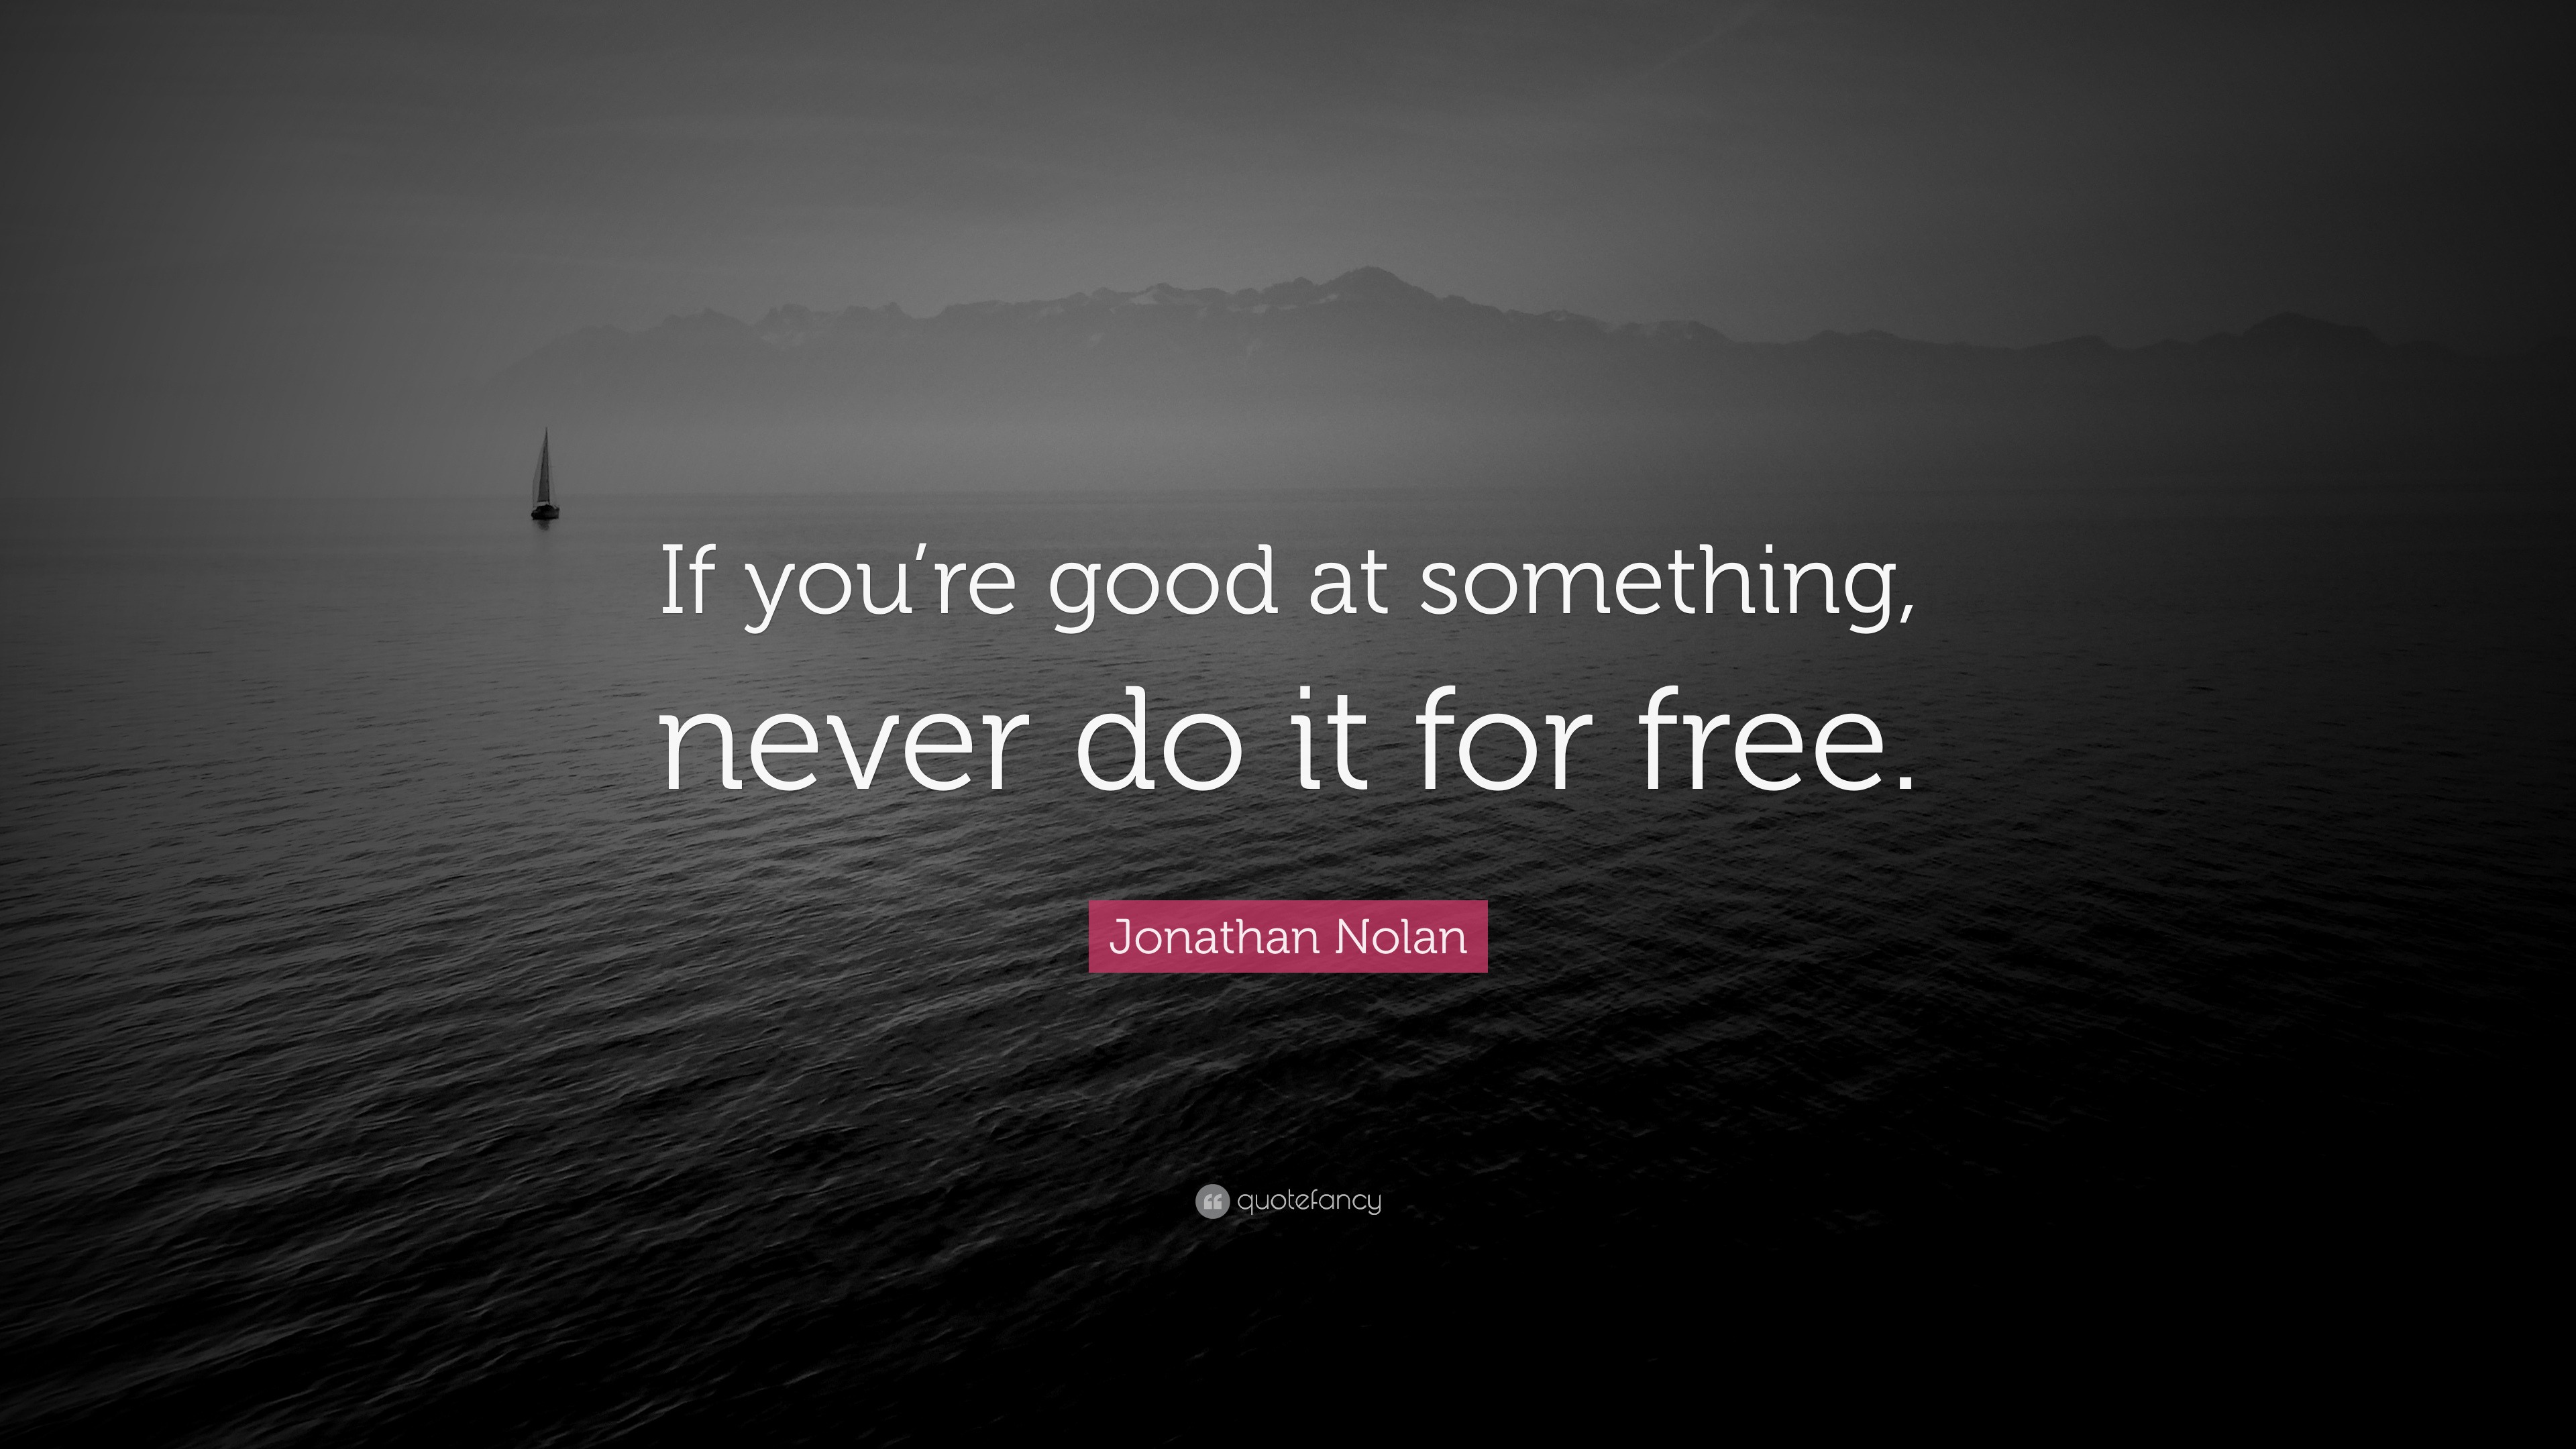 Jonathan Nolan Quote If You Re Good At Something Never Do It For Free